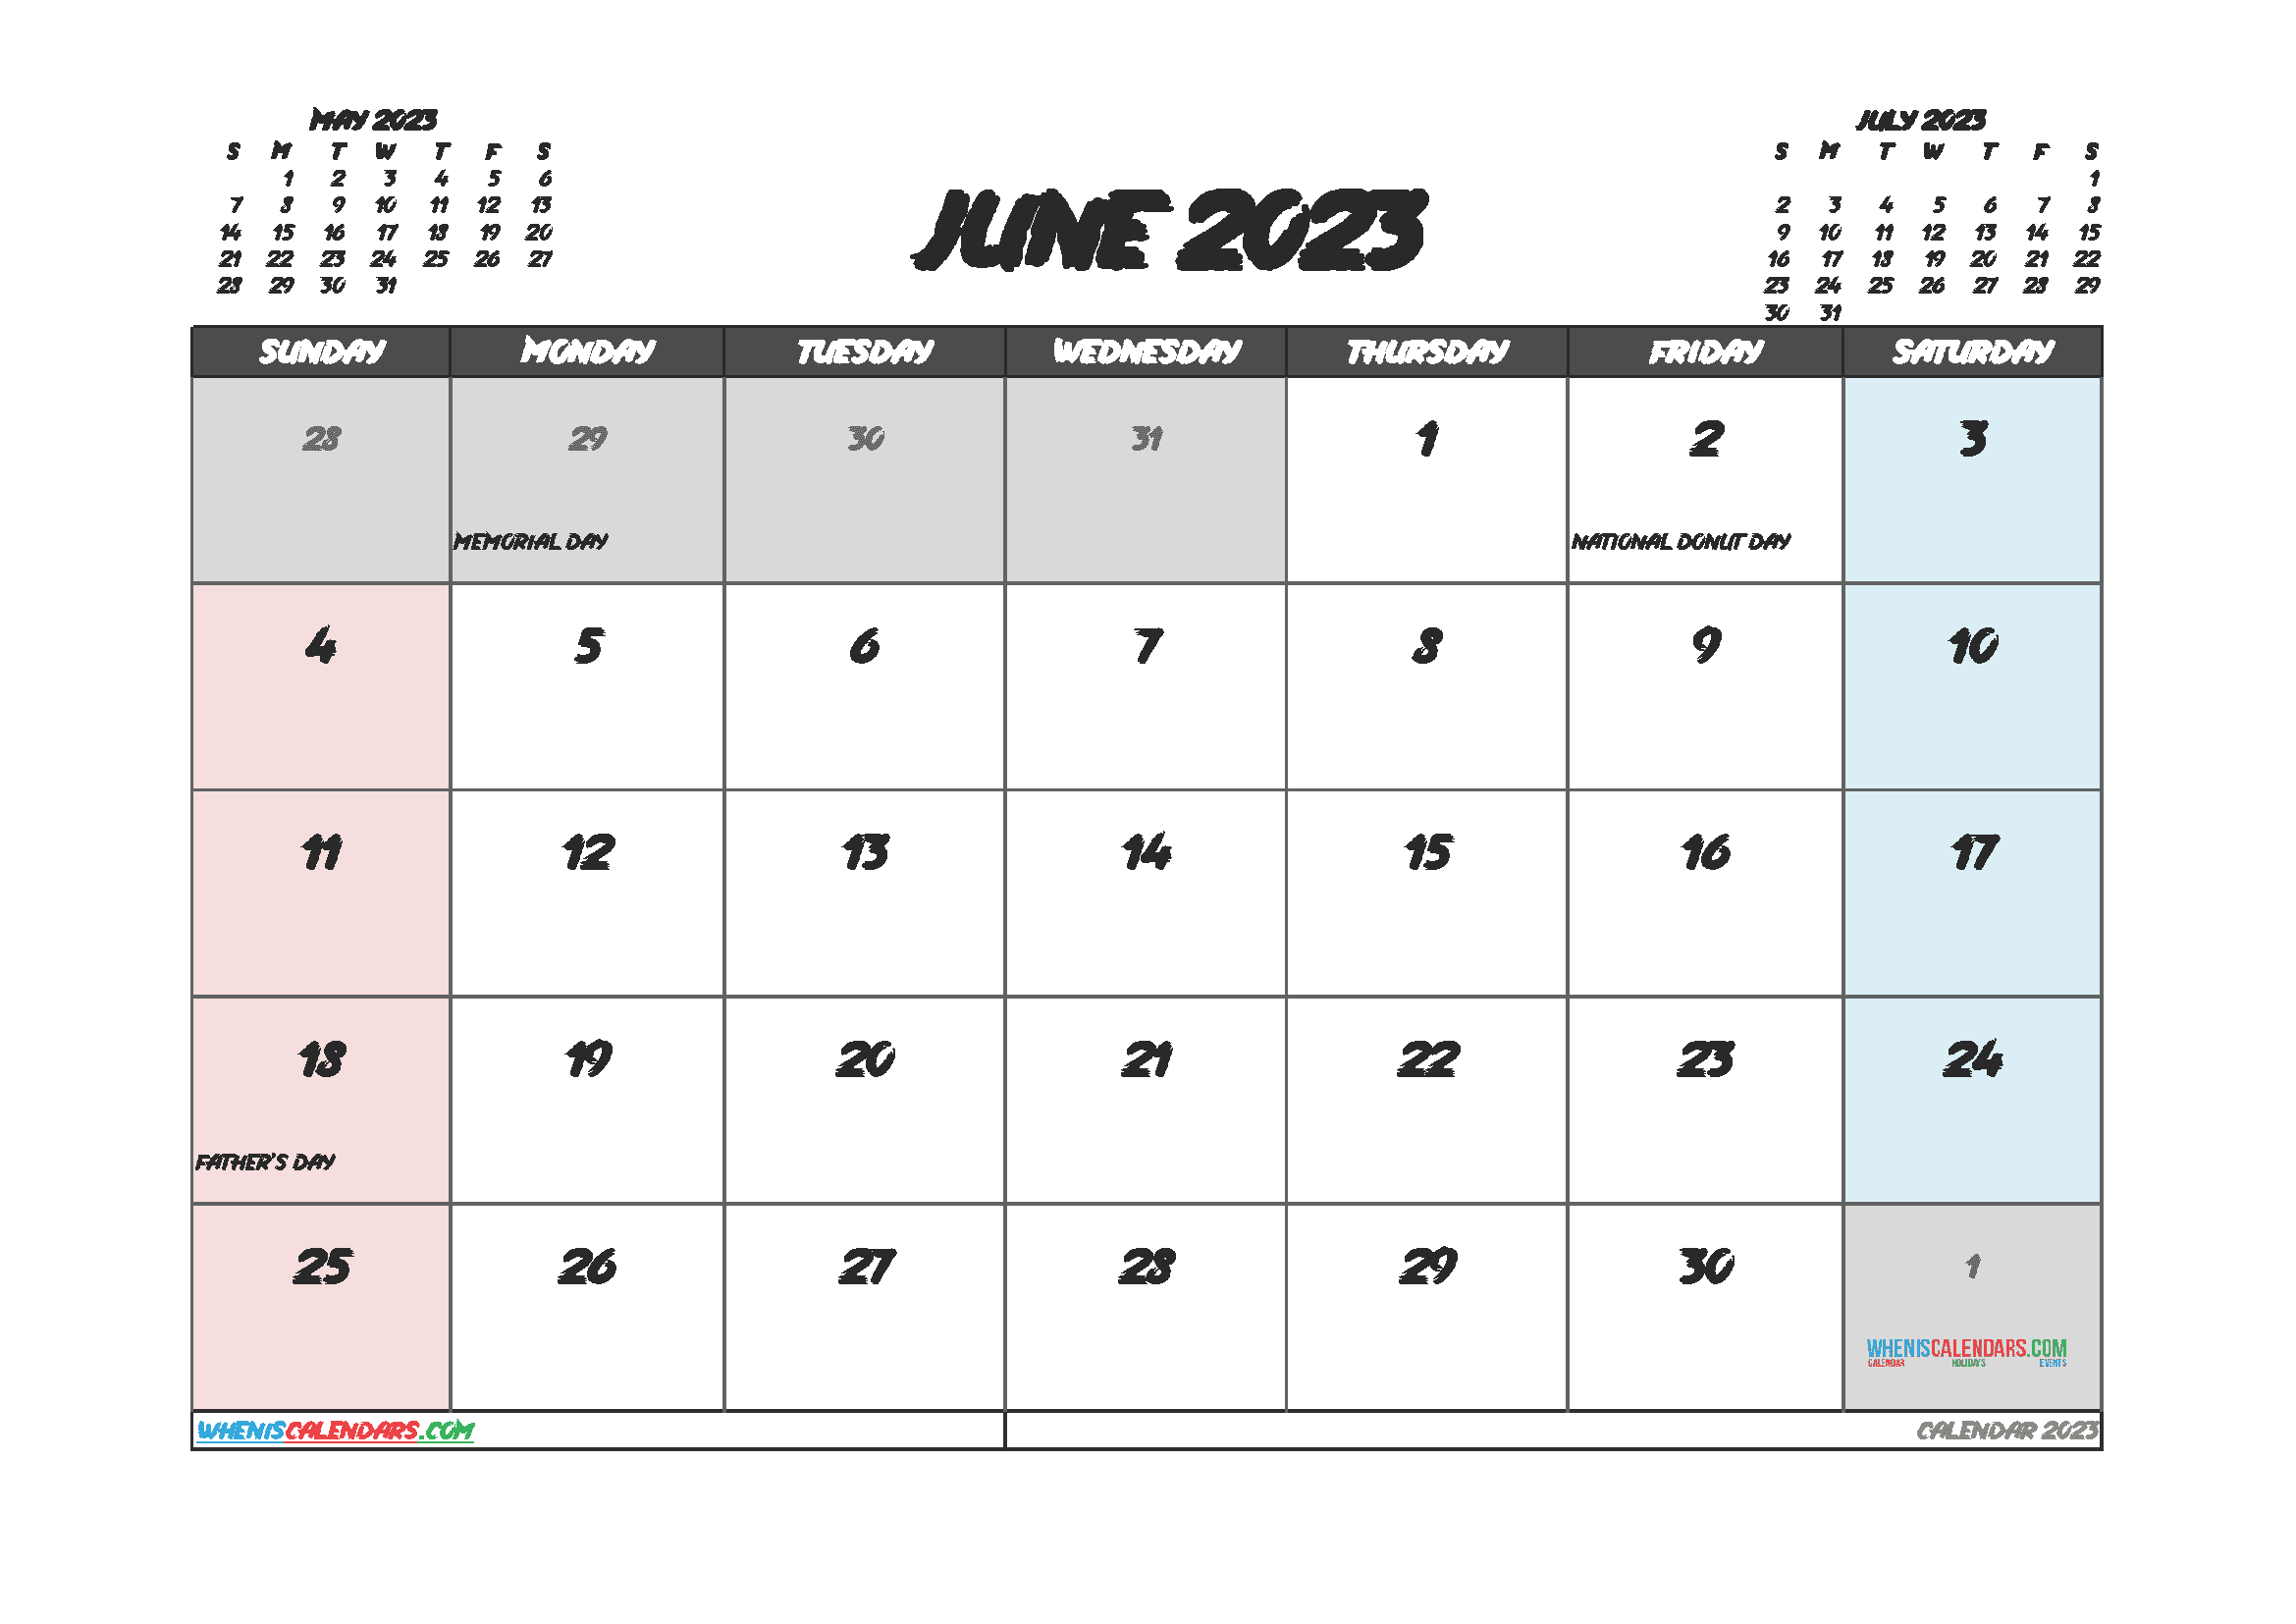 Downloadable June 2023 Calendar with Holidays Printable Free PDF in Landscape